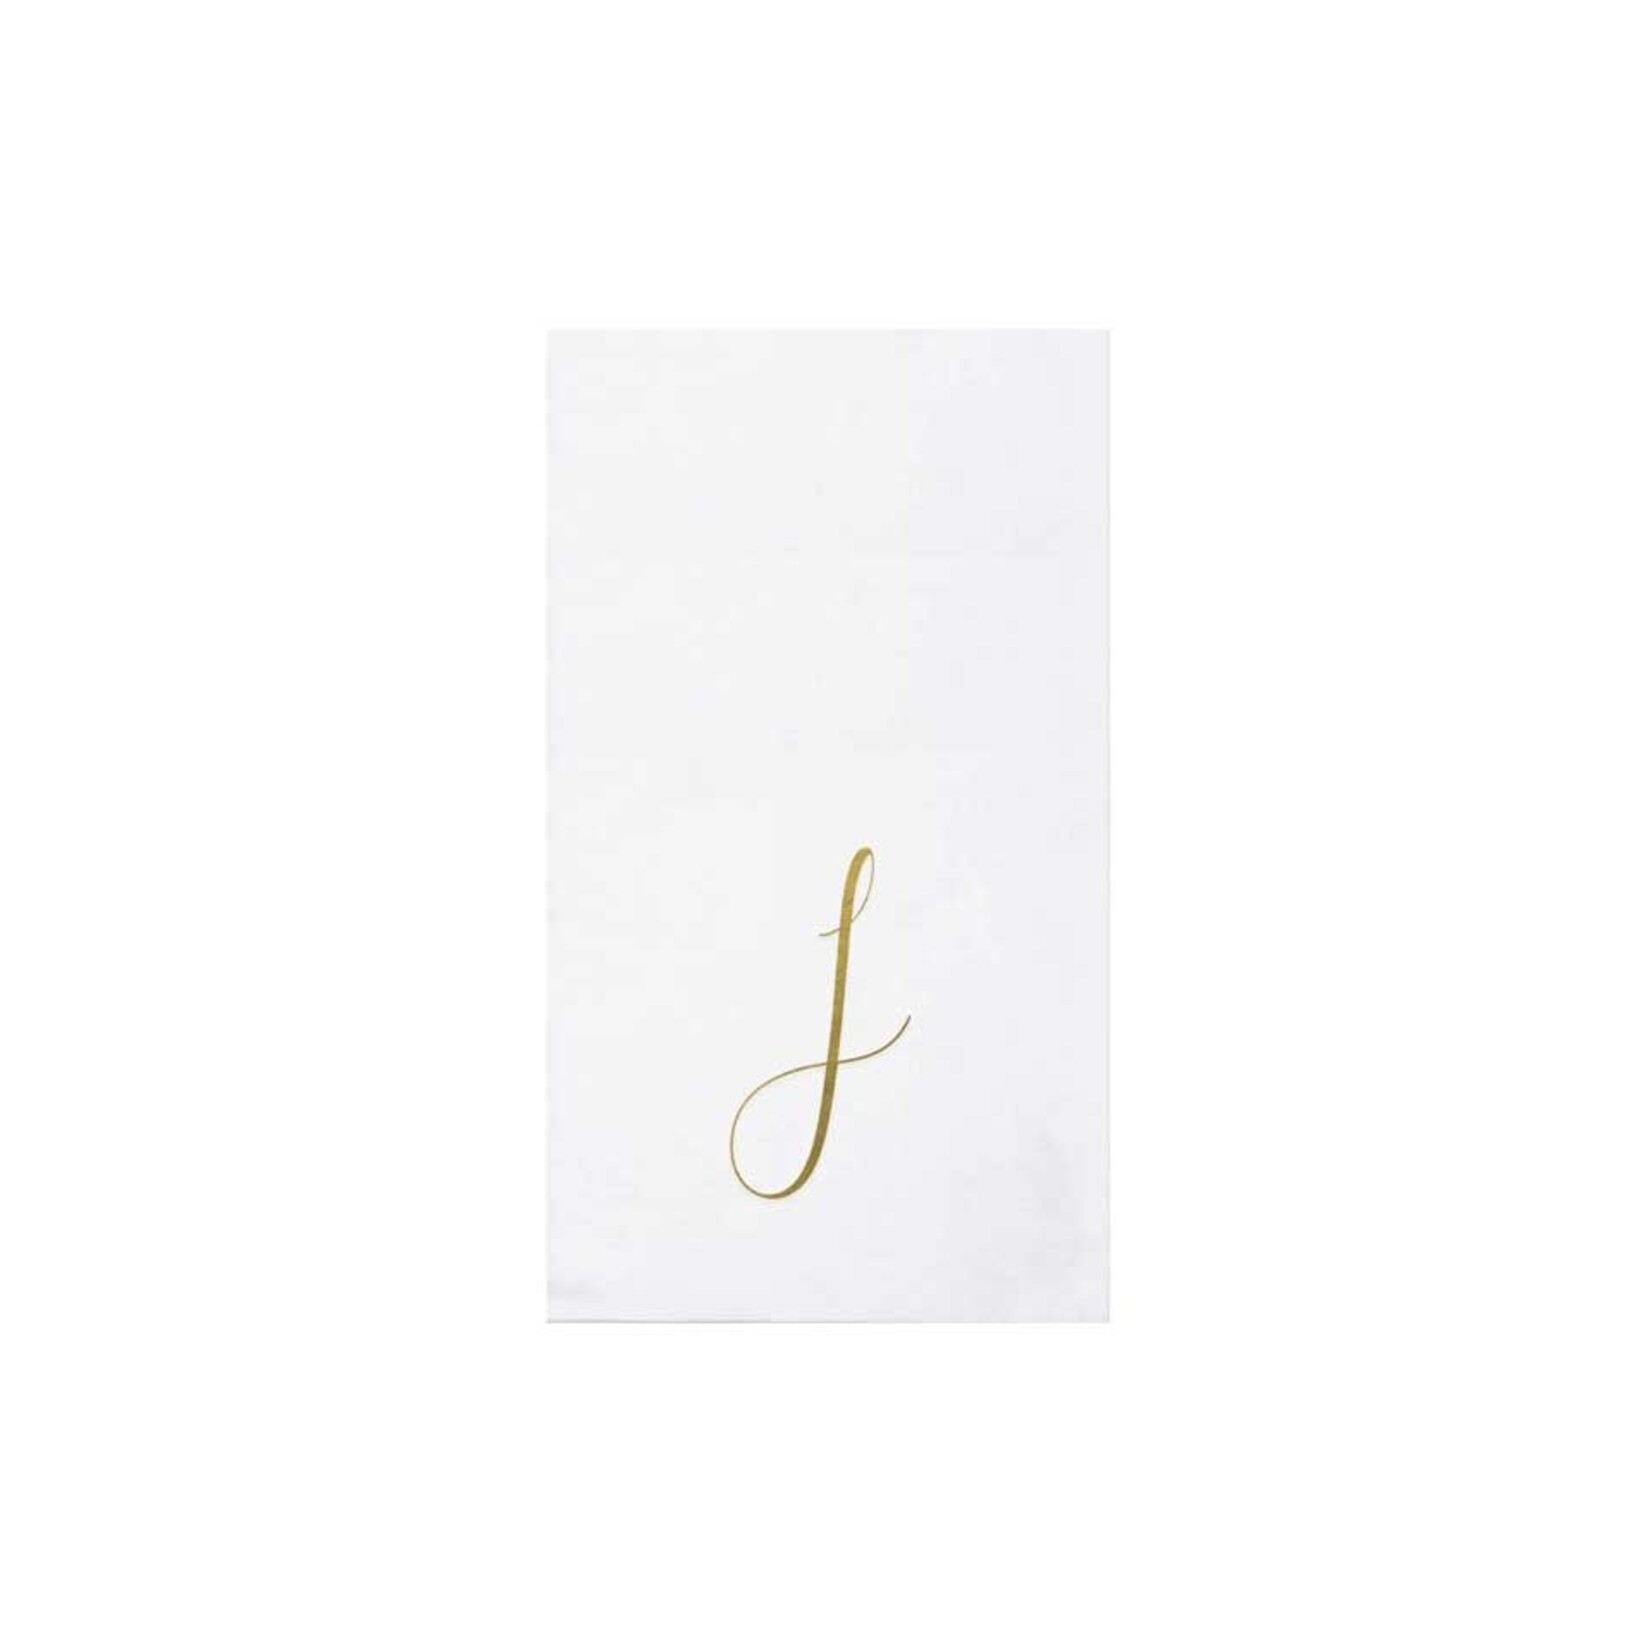 VIETRI Papersoft Napkins Gold Monogram Guest Towels - J (Pack of 20)